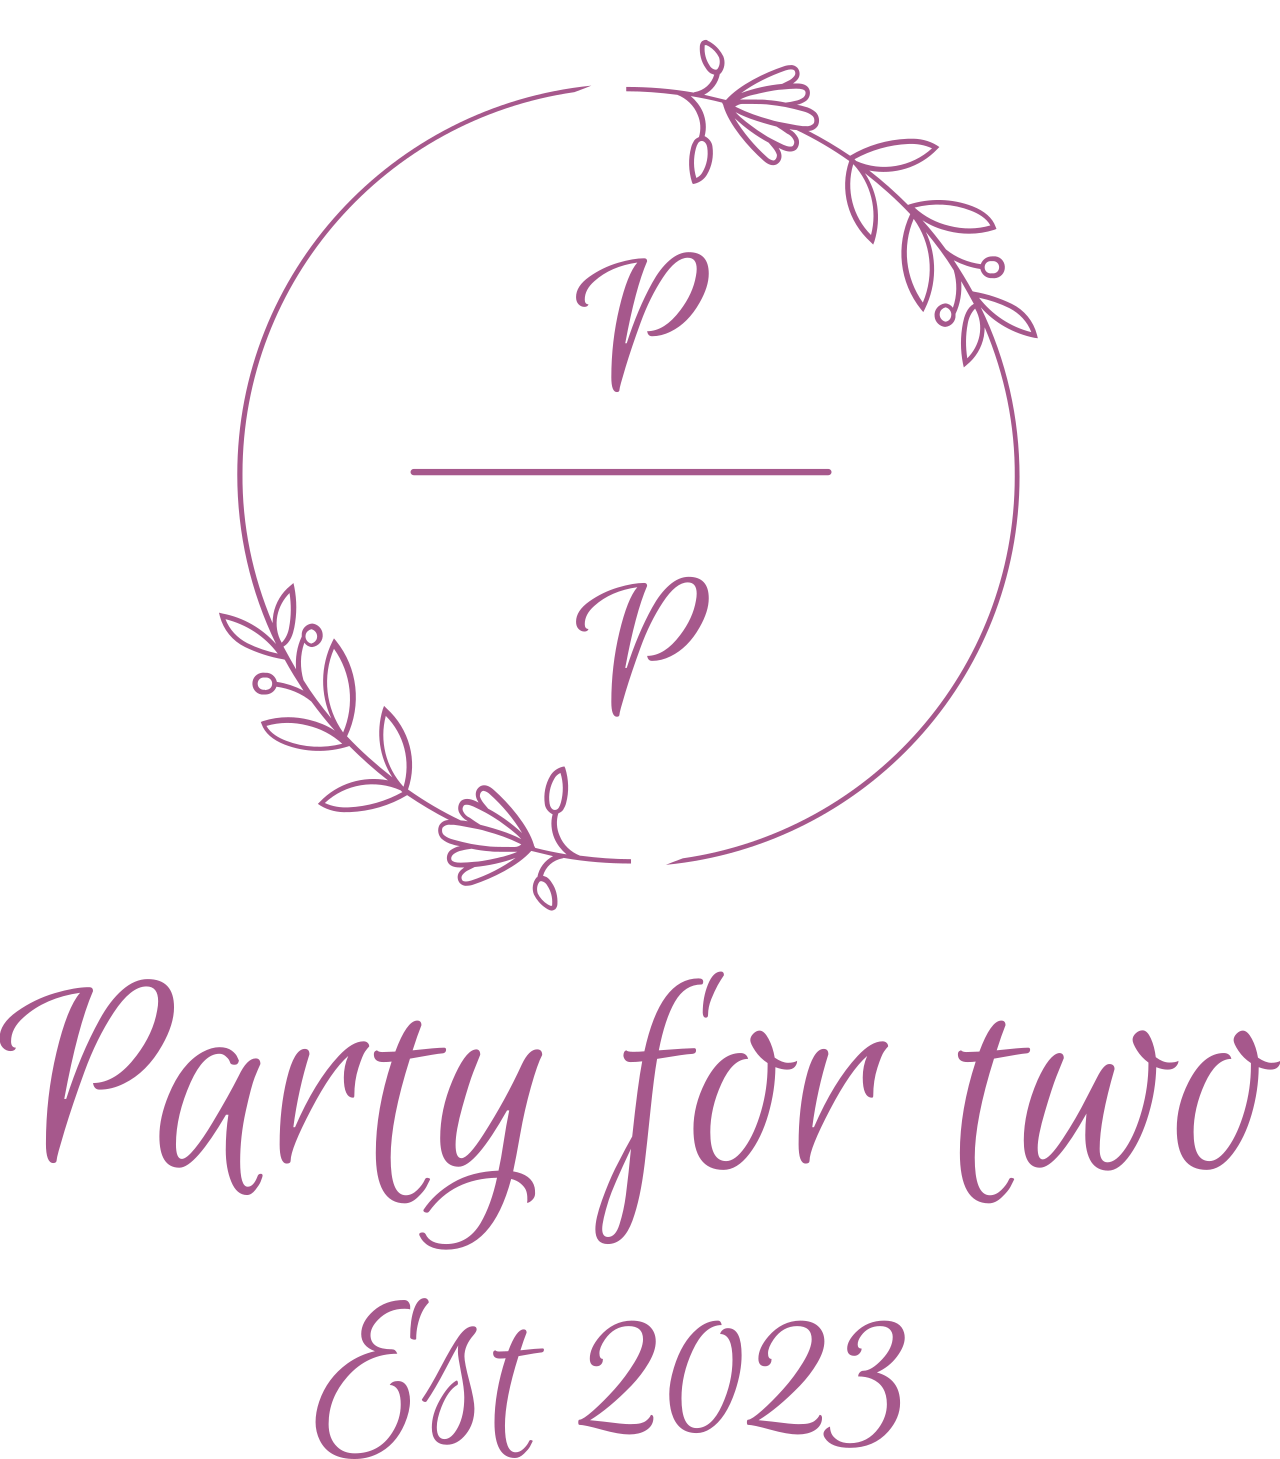 Party for two's logo